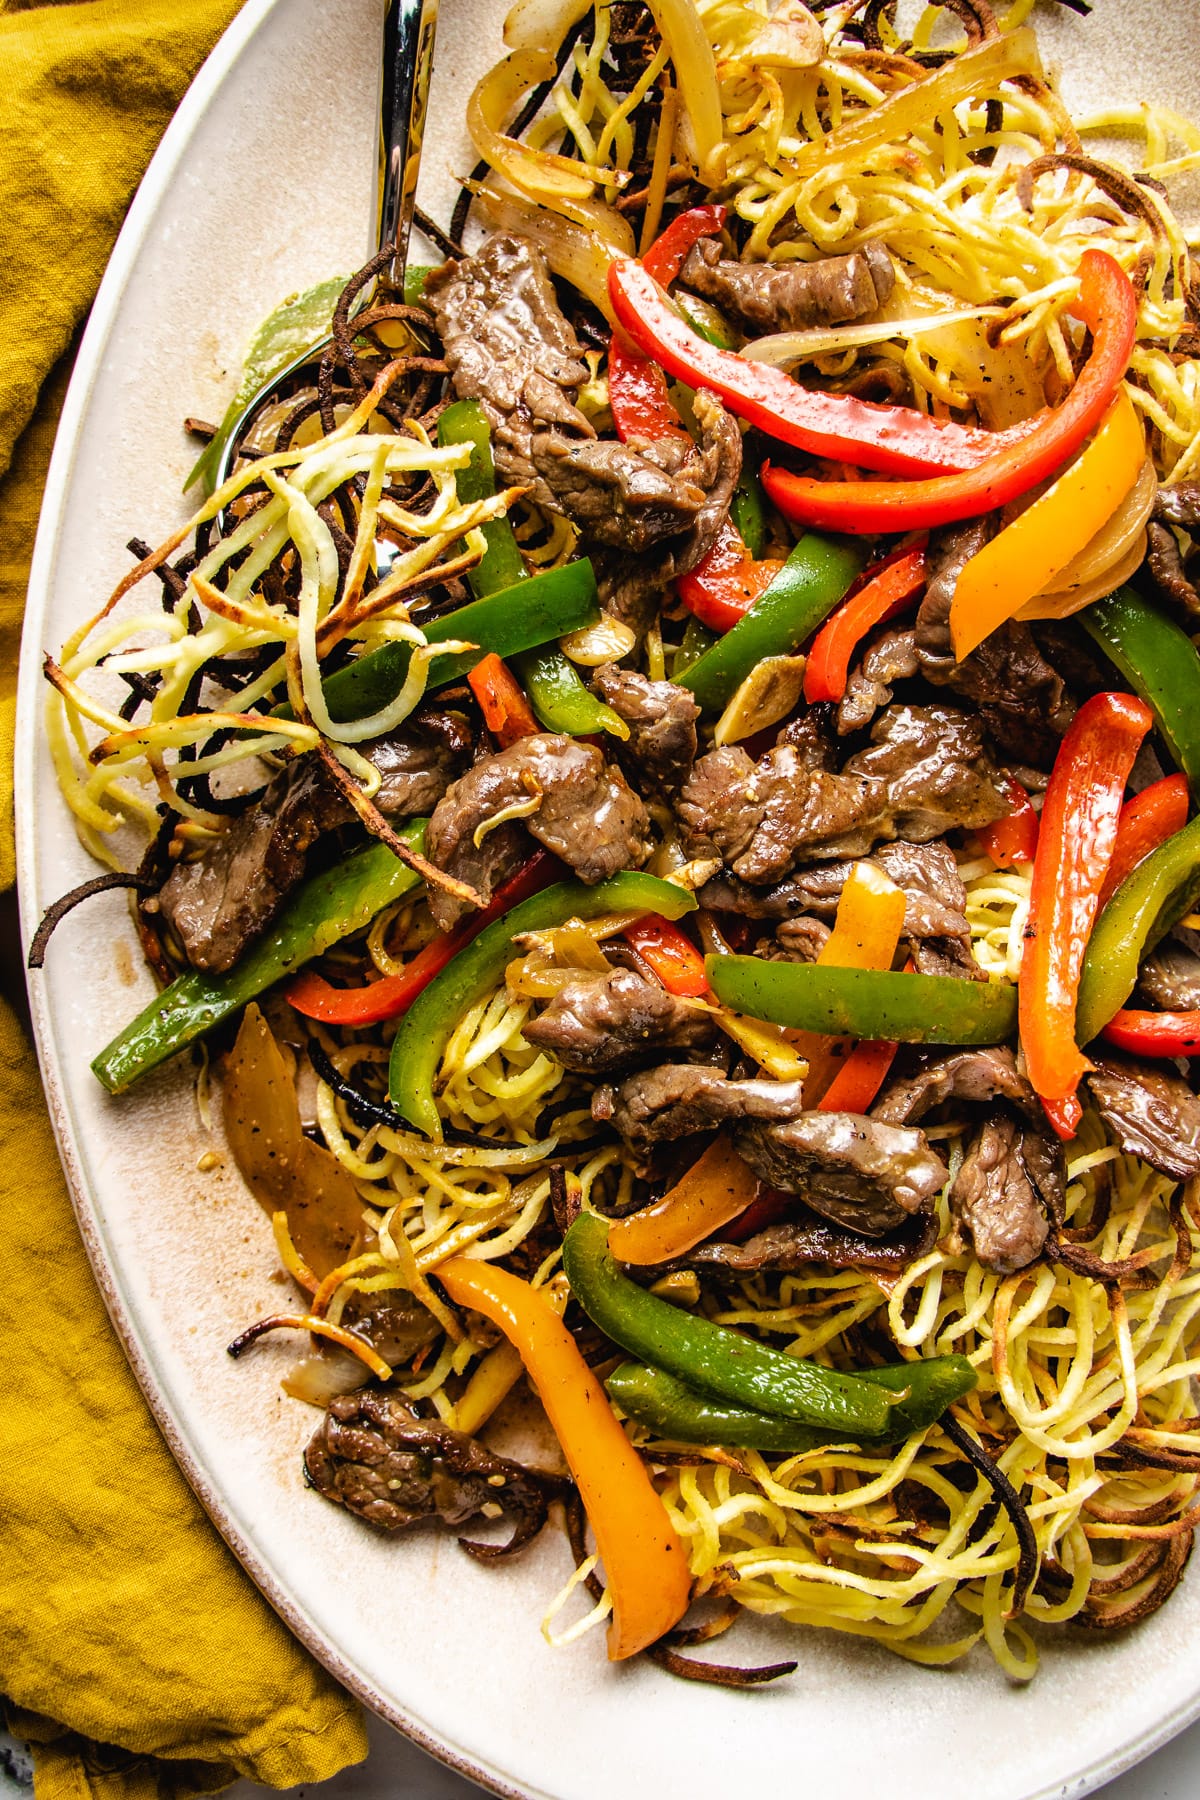 A close shot shows the chow mein and beef in an oval plate